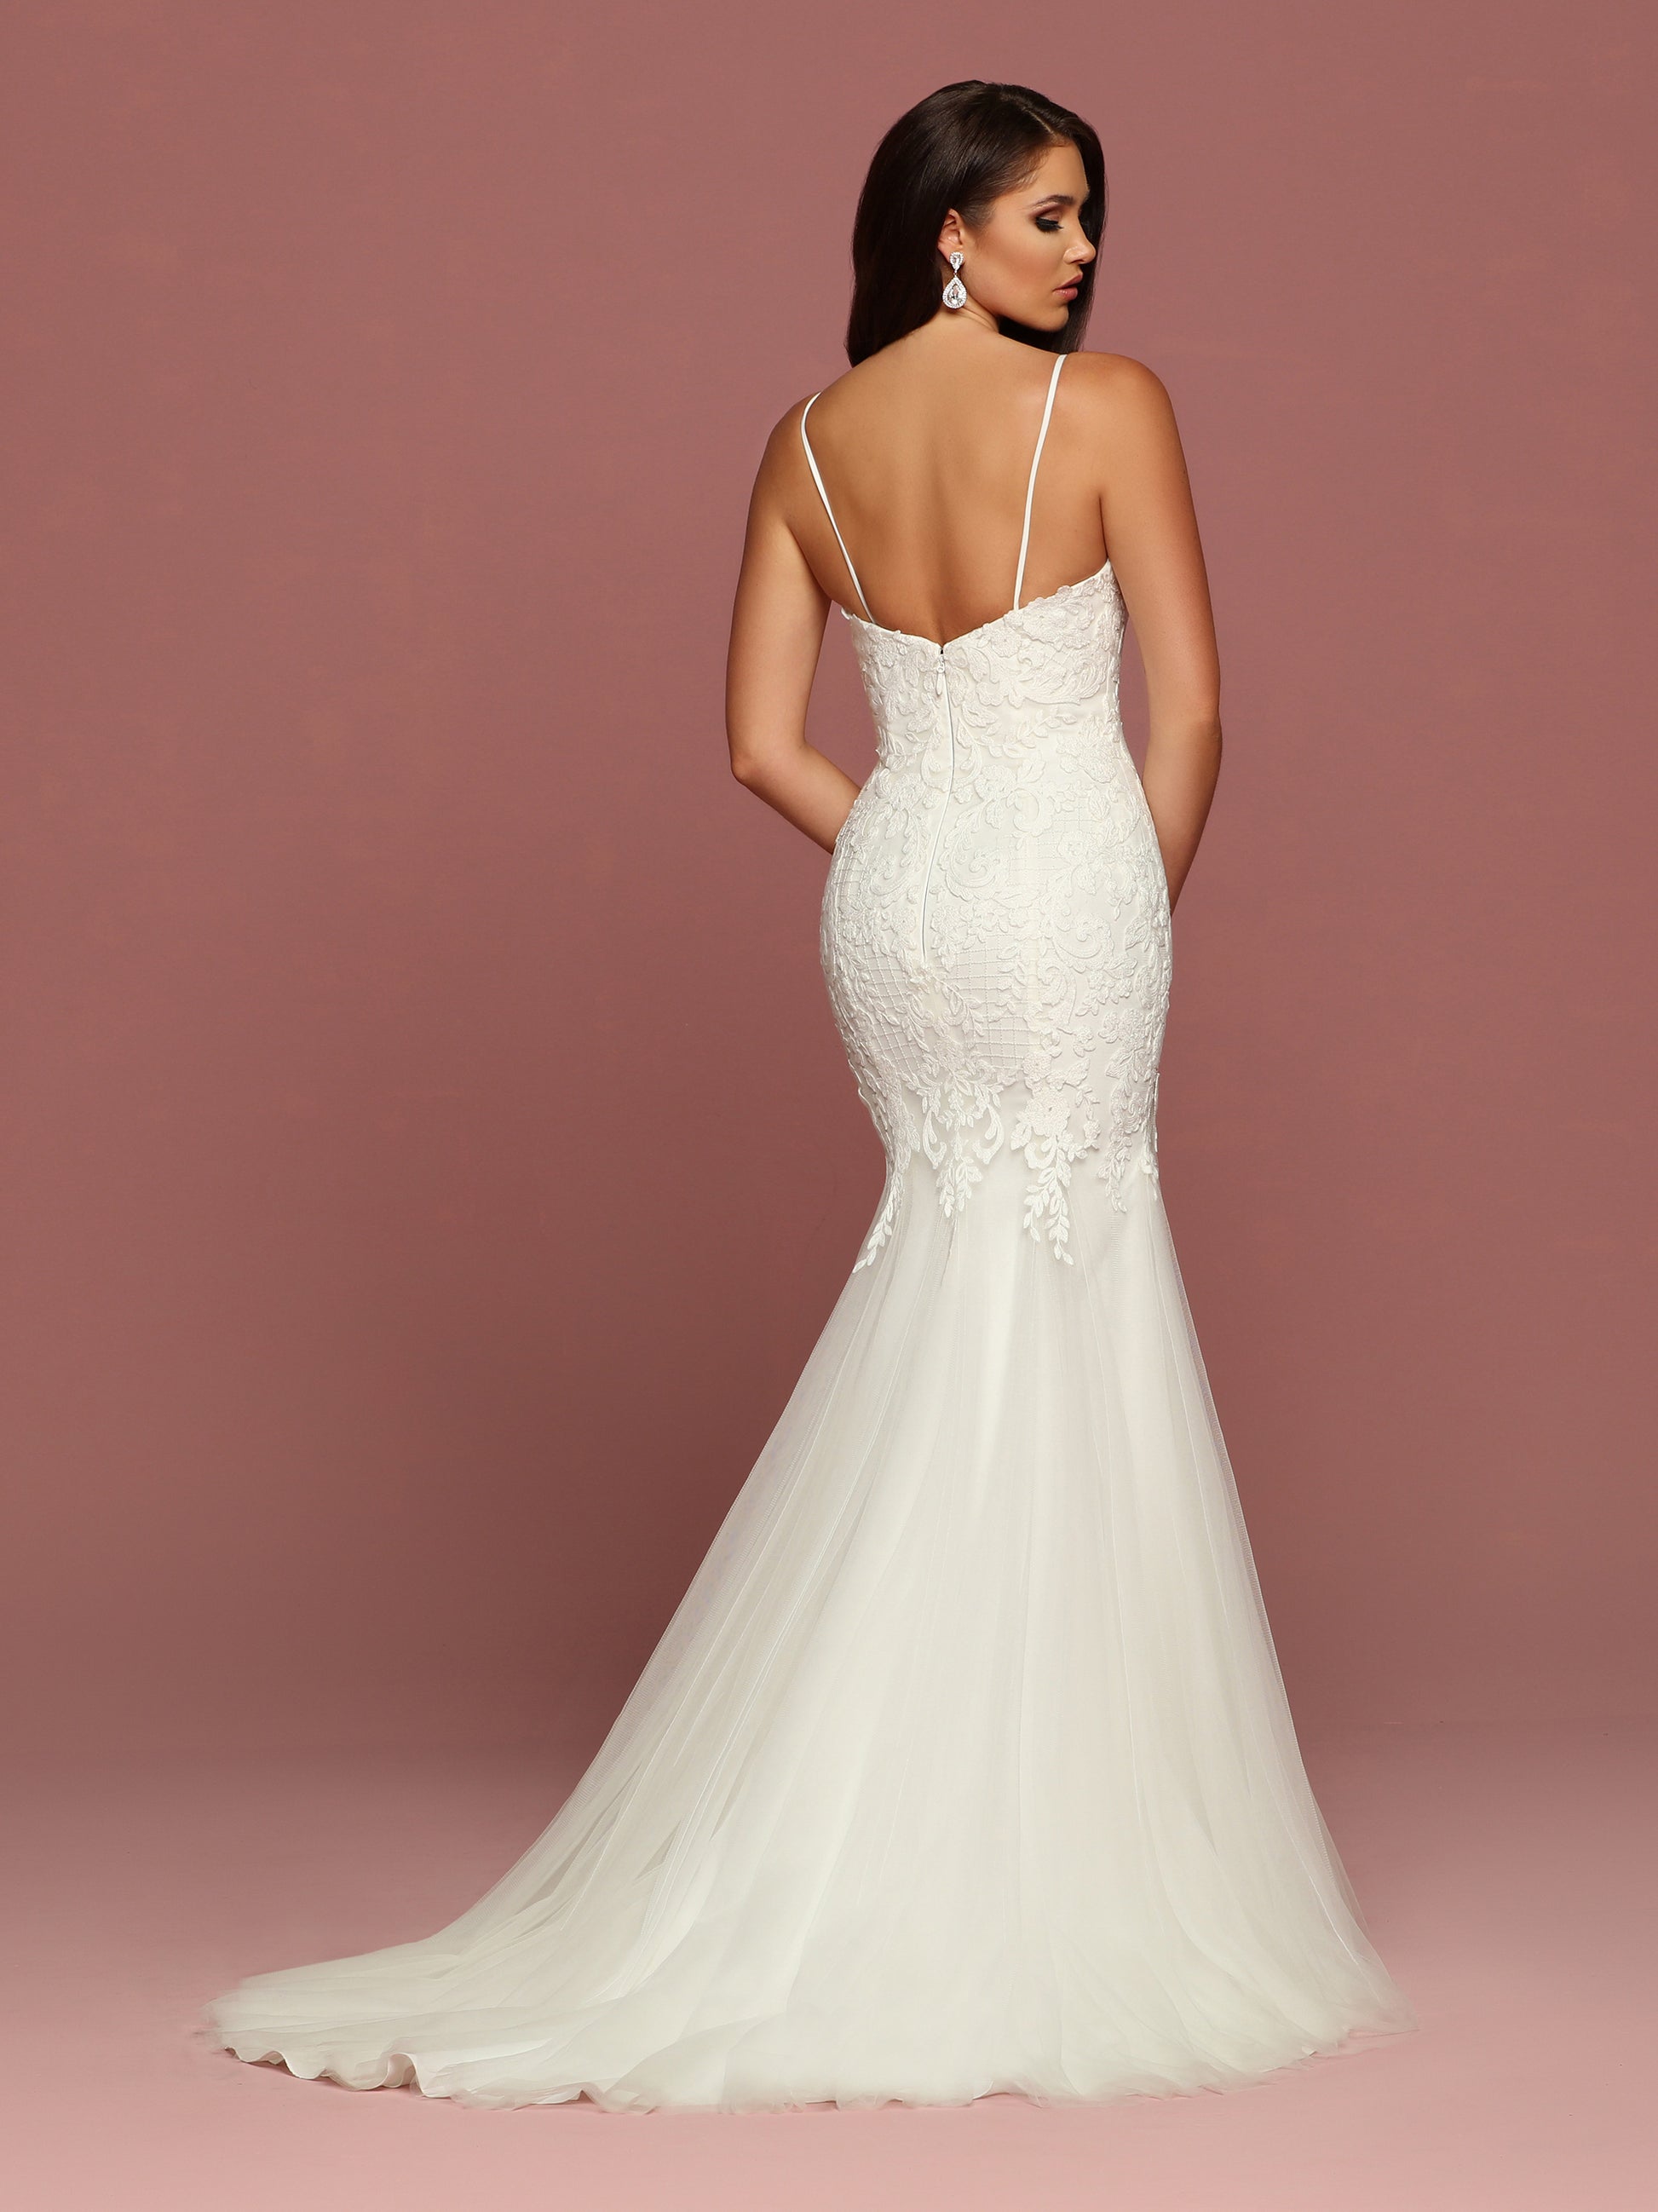 Davinci Bridal 50498 is a Fitted Mermaid Wedding dress. The bodice is adorned with lace that cascades into the tulle trumpet skirt. V Neck with spaghetti straps.  Available for 1-2 Week Delivery!!!  Available Sizes: 2,4,6,8,10,12,14,16,18,20  Available Colors: Ivory